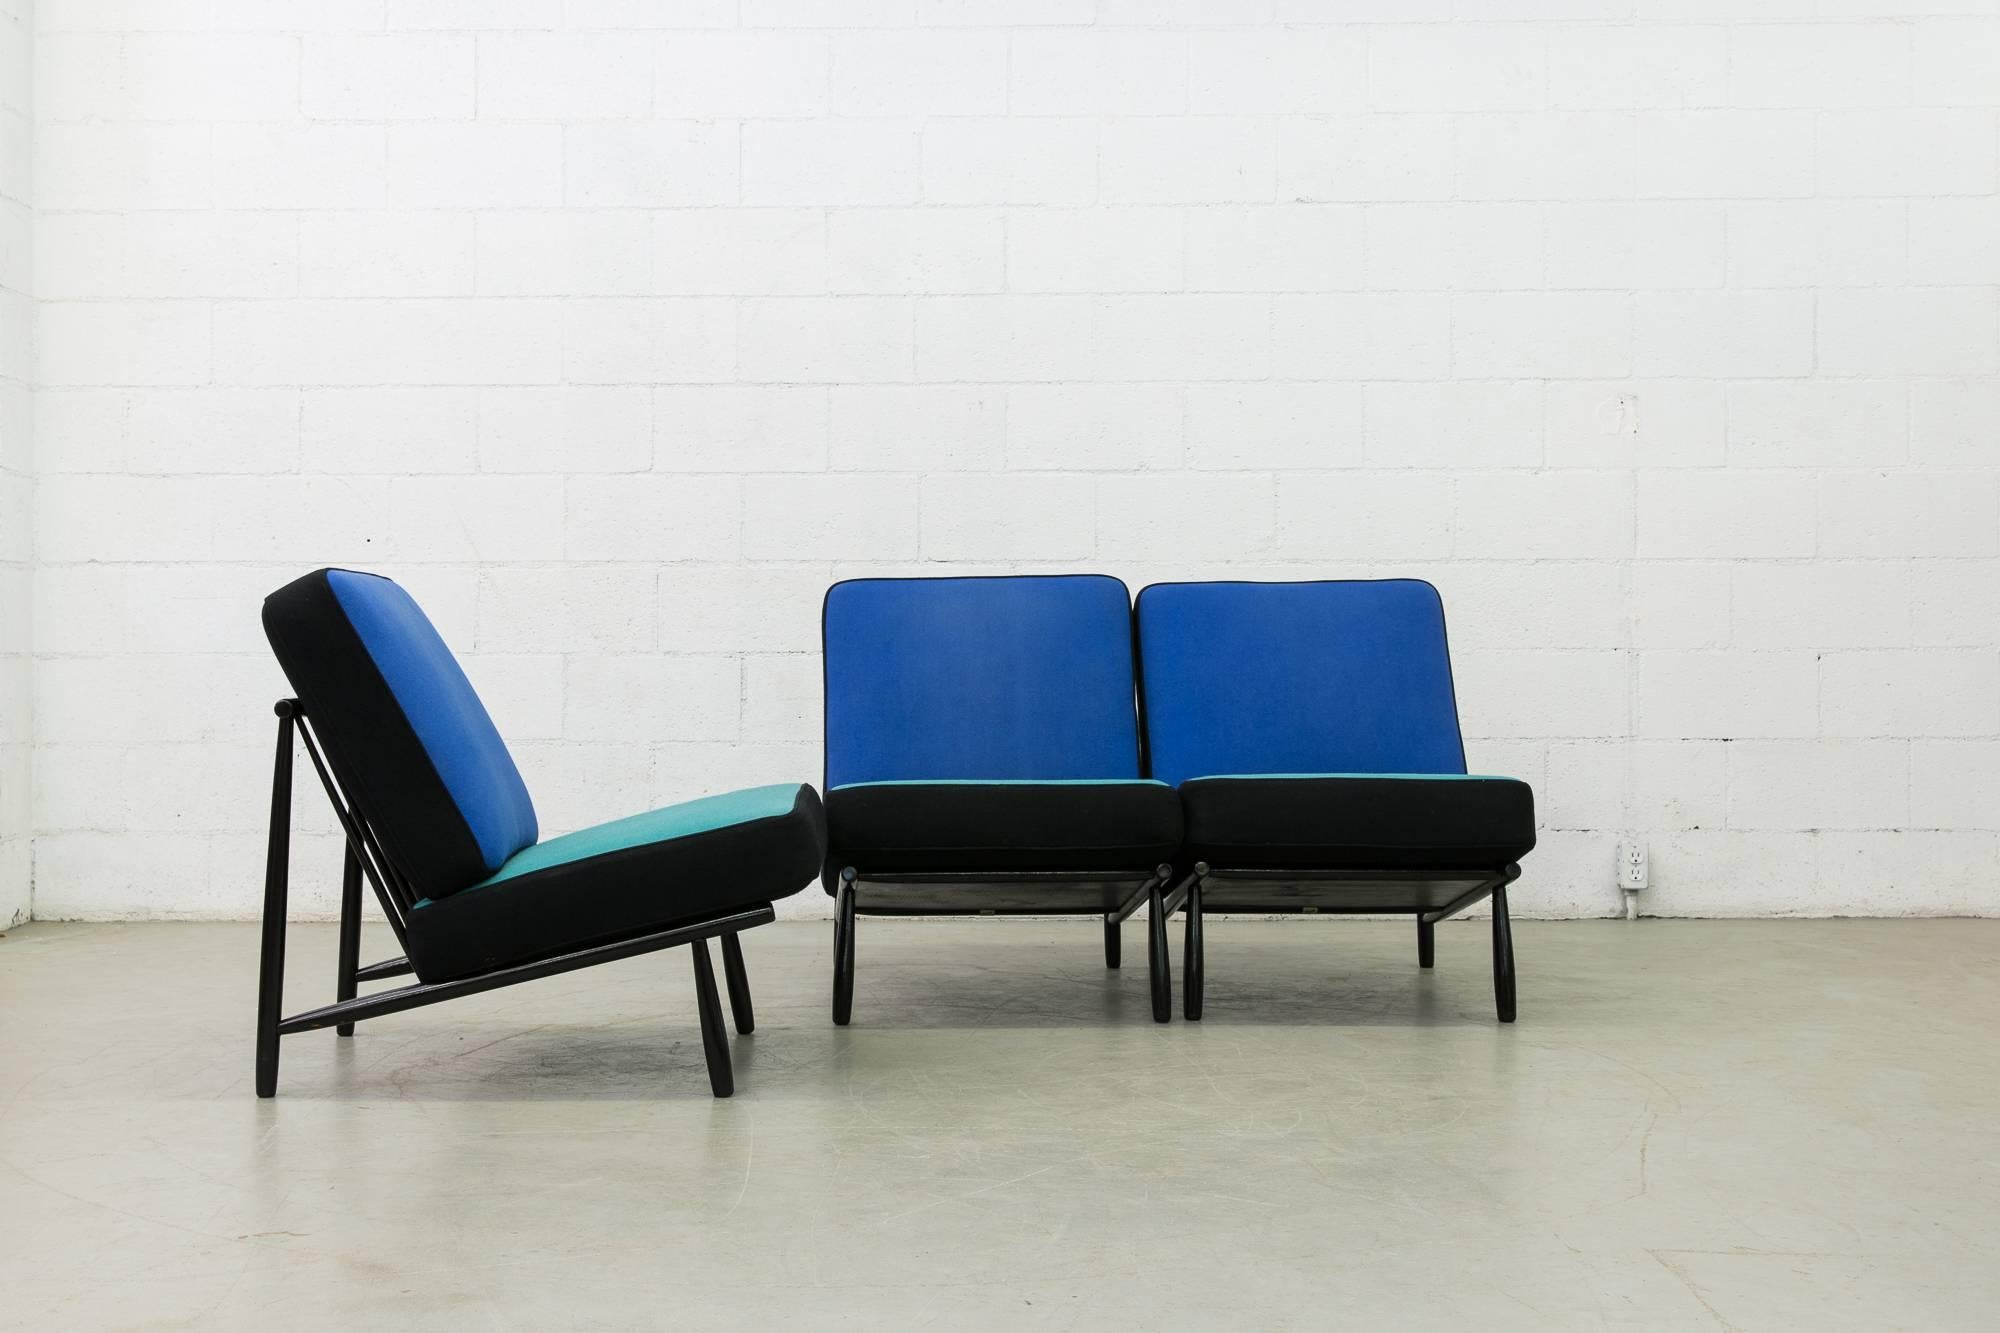 Designed in 1955 for the Helsingborg Expo this is a set of three black lacquered wood framed easy chairs with royal/turquoise/black wool upholstered cushions. The chairs sit low to the ground and can be used as a three-seat sofa, or three individual